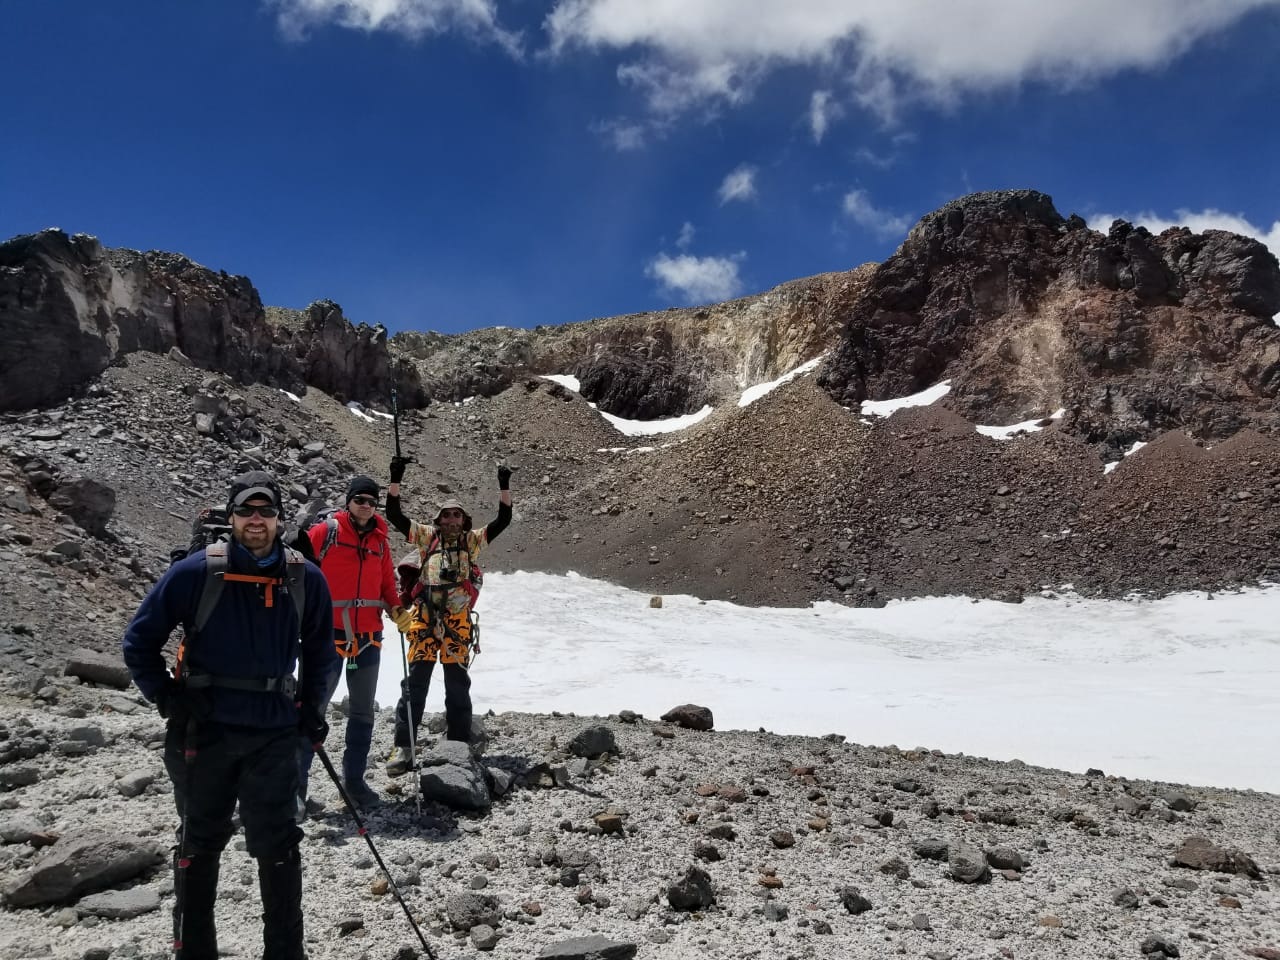 Professionally guided mountaineering trips in Chile. Climb the world's highest volcano, Ojos Del Salado, in just 9 days! Enjoy intimate knowledge of the Andes Mountains, while being led by an Alpenglow Expeditions mountain guide who will give climbers an interactive and authentic experience with Andean culture.